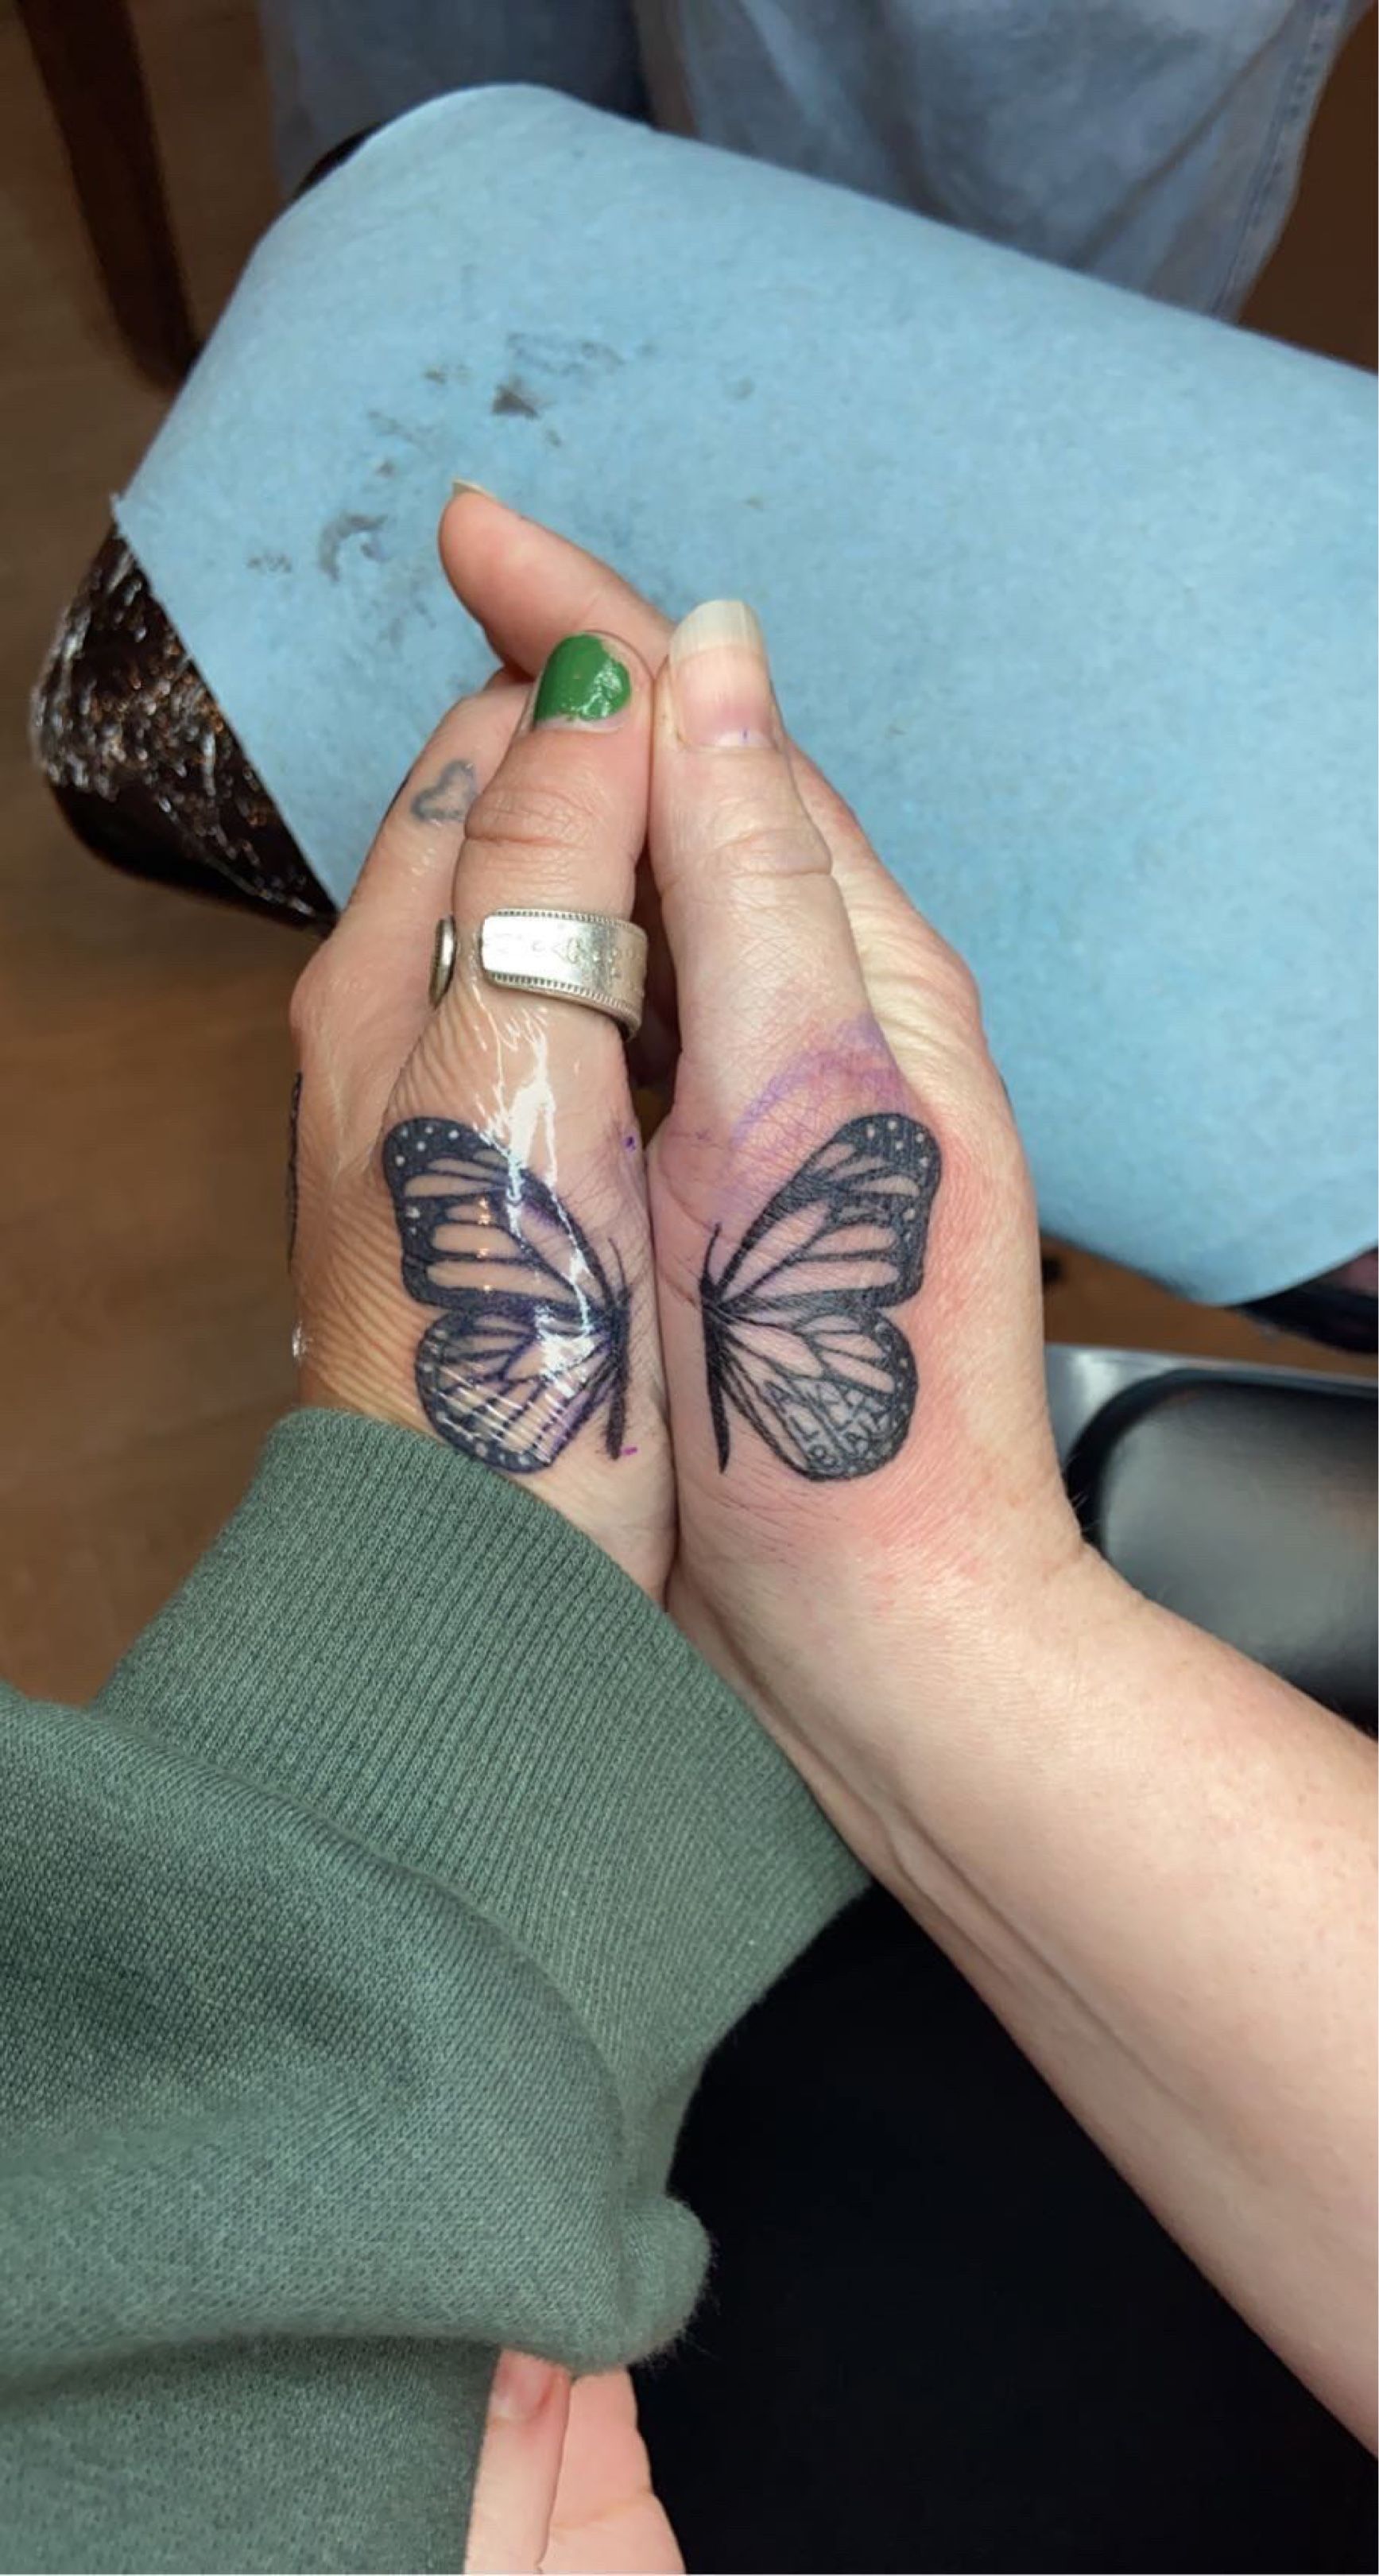 Skin Candy Tattoos  Mother and Son matching tattoos done by Michelle For  bookings please callwhatsapp 081 598 1204  Facebook